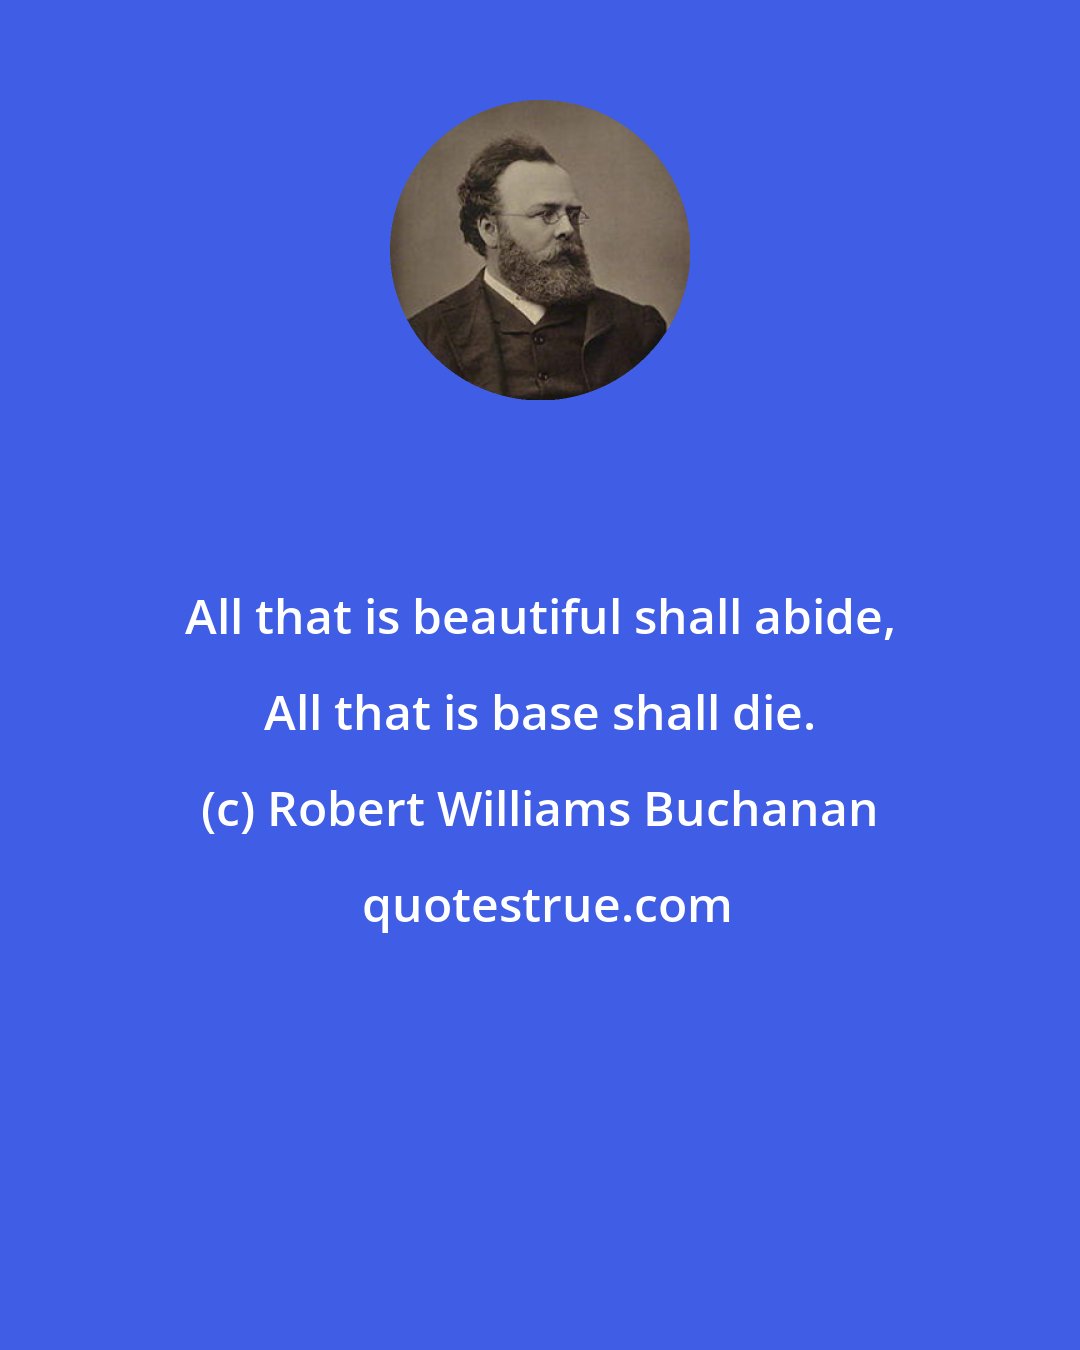 Robert Williams Buchanan: All that is beautiful shall abide, All that is base shall die.